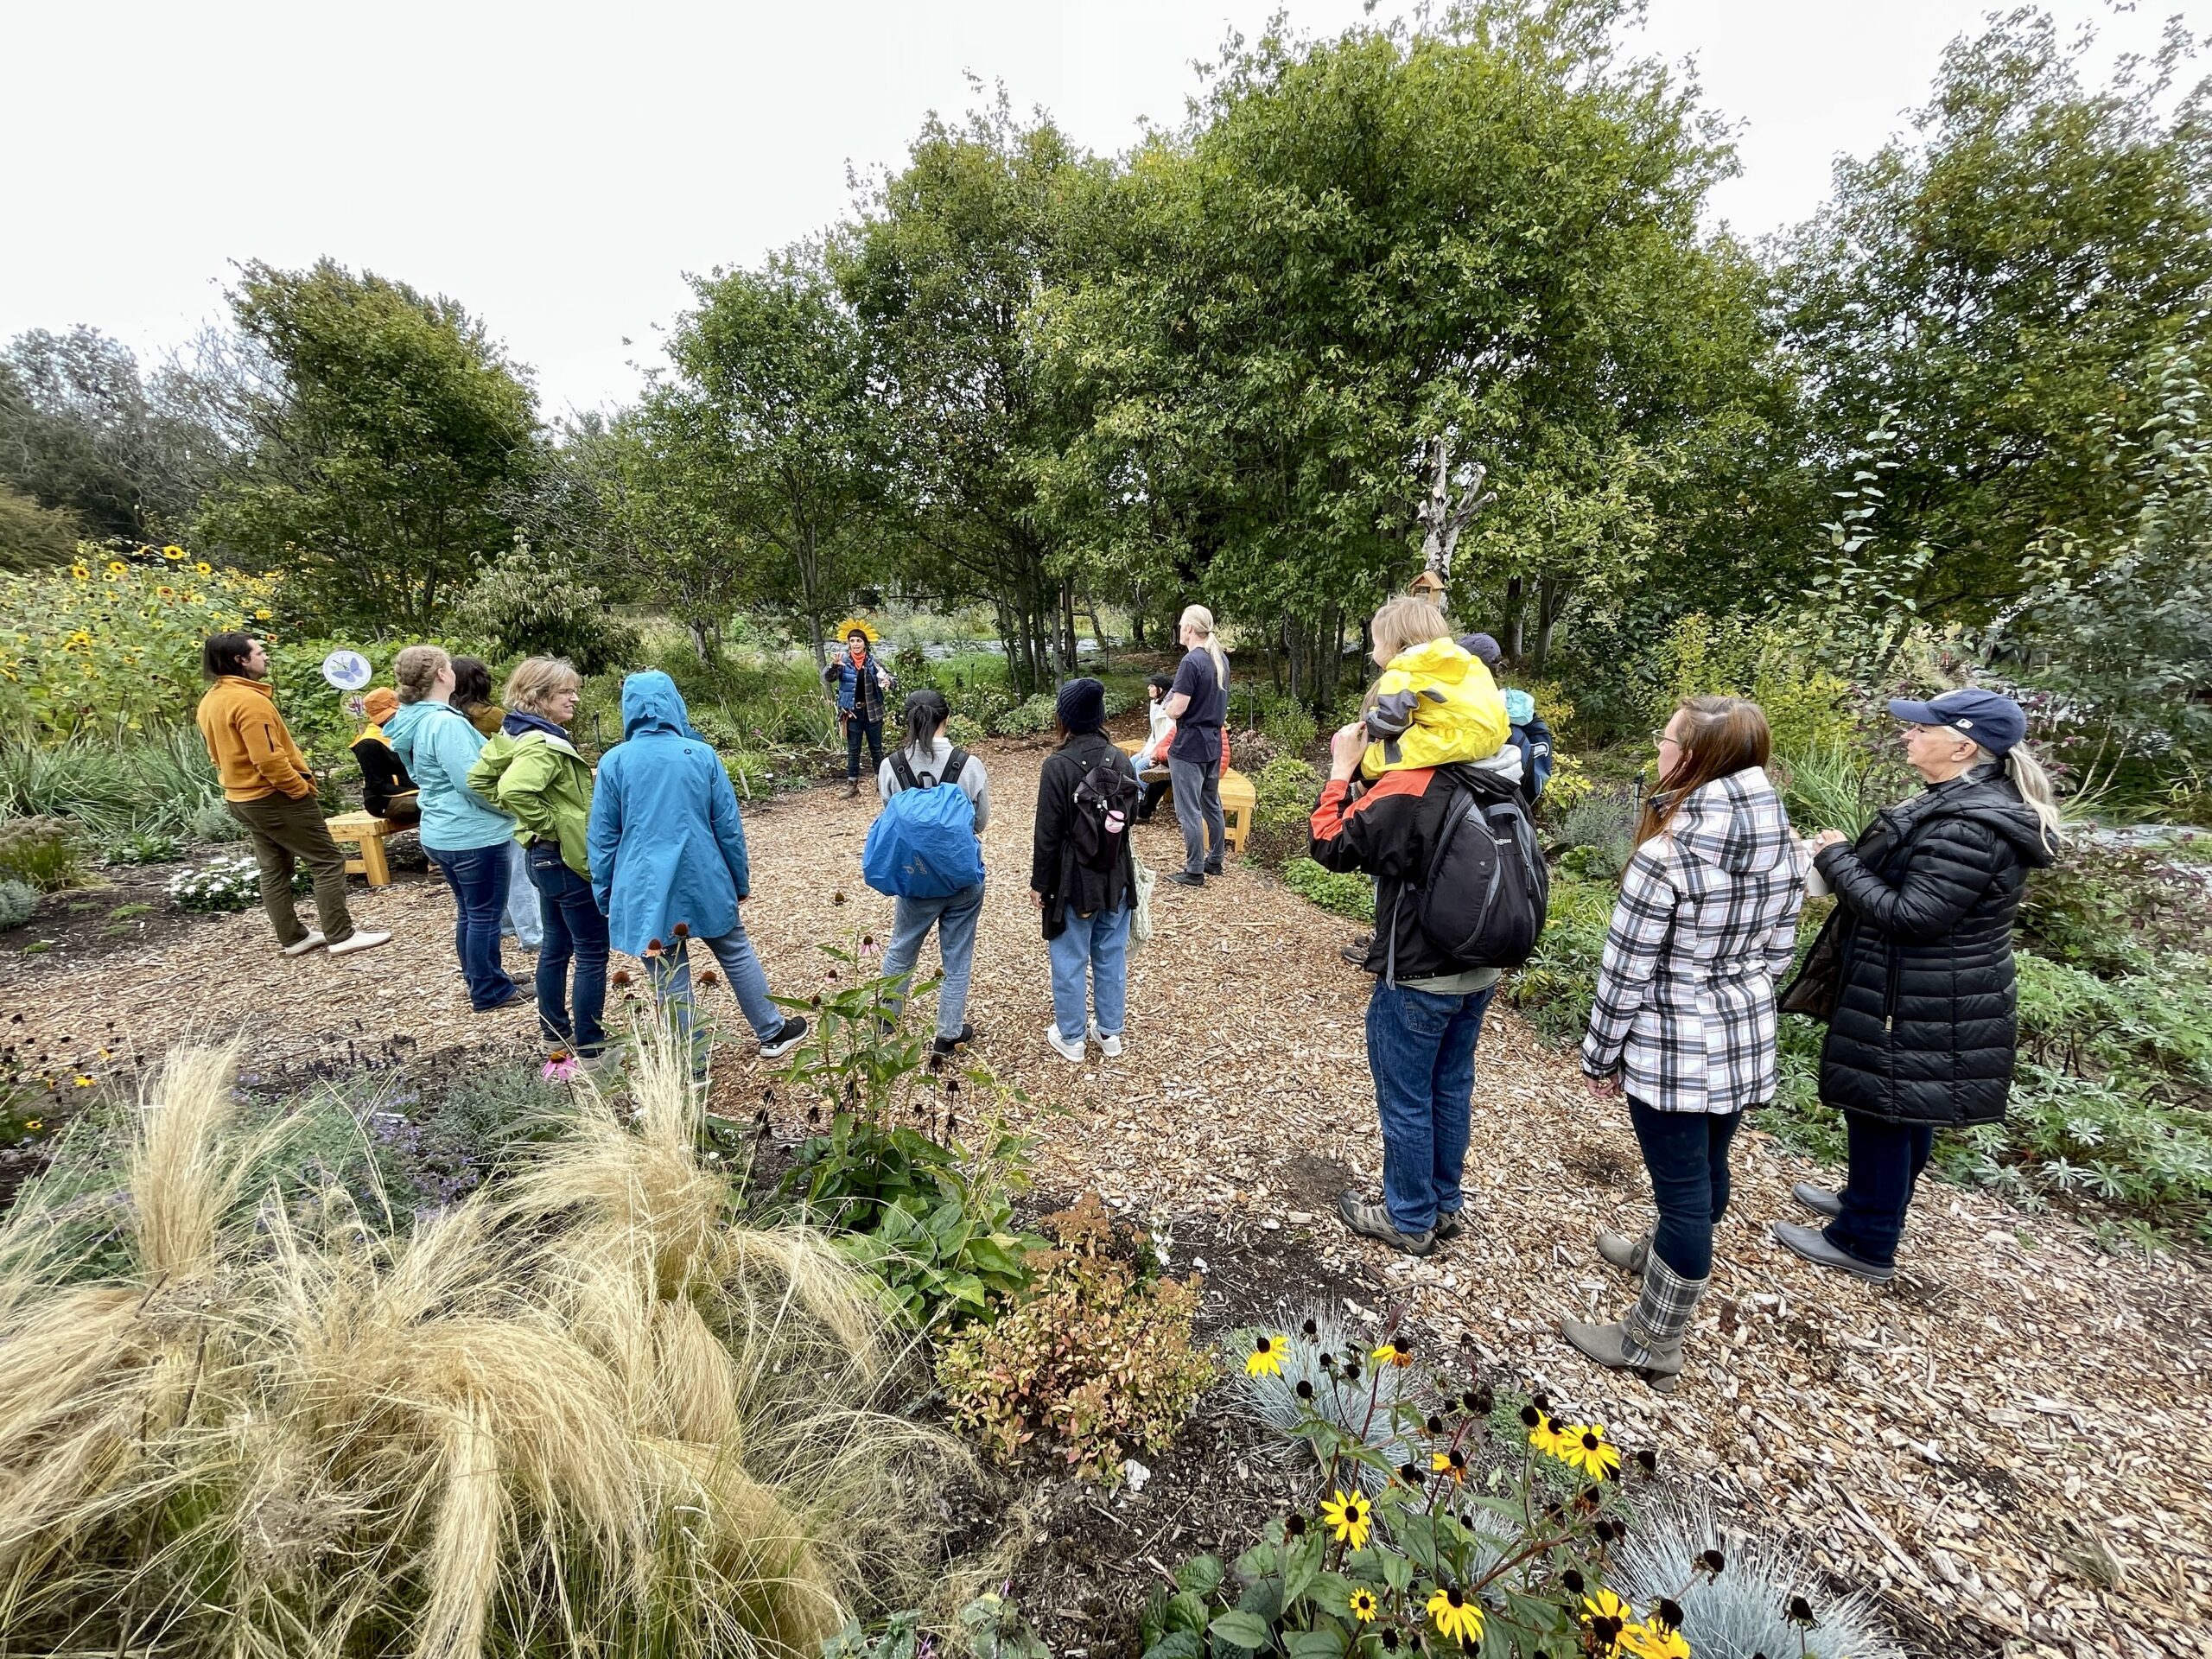 Visitors enjoy learning about the role of pollinators in regenerative agriculture during a Farm Walk event.